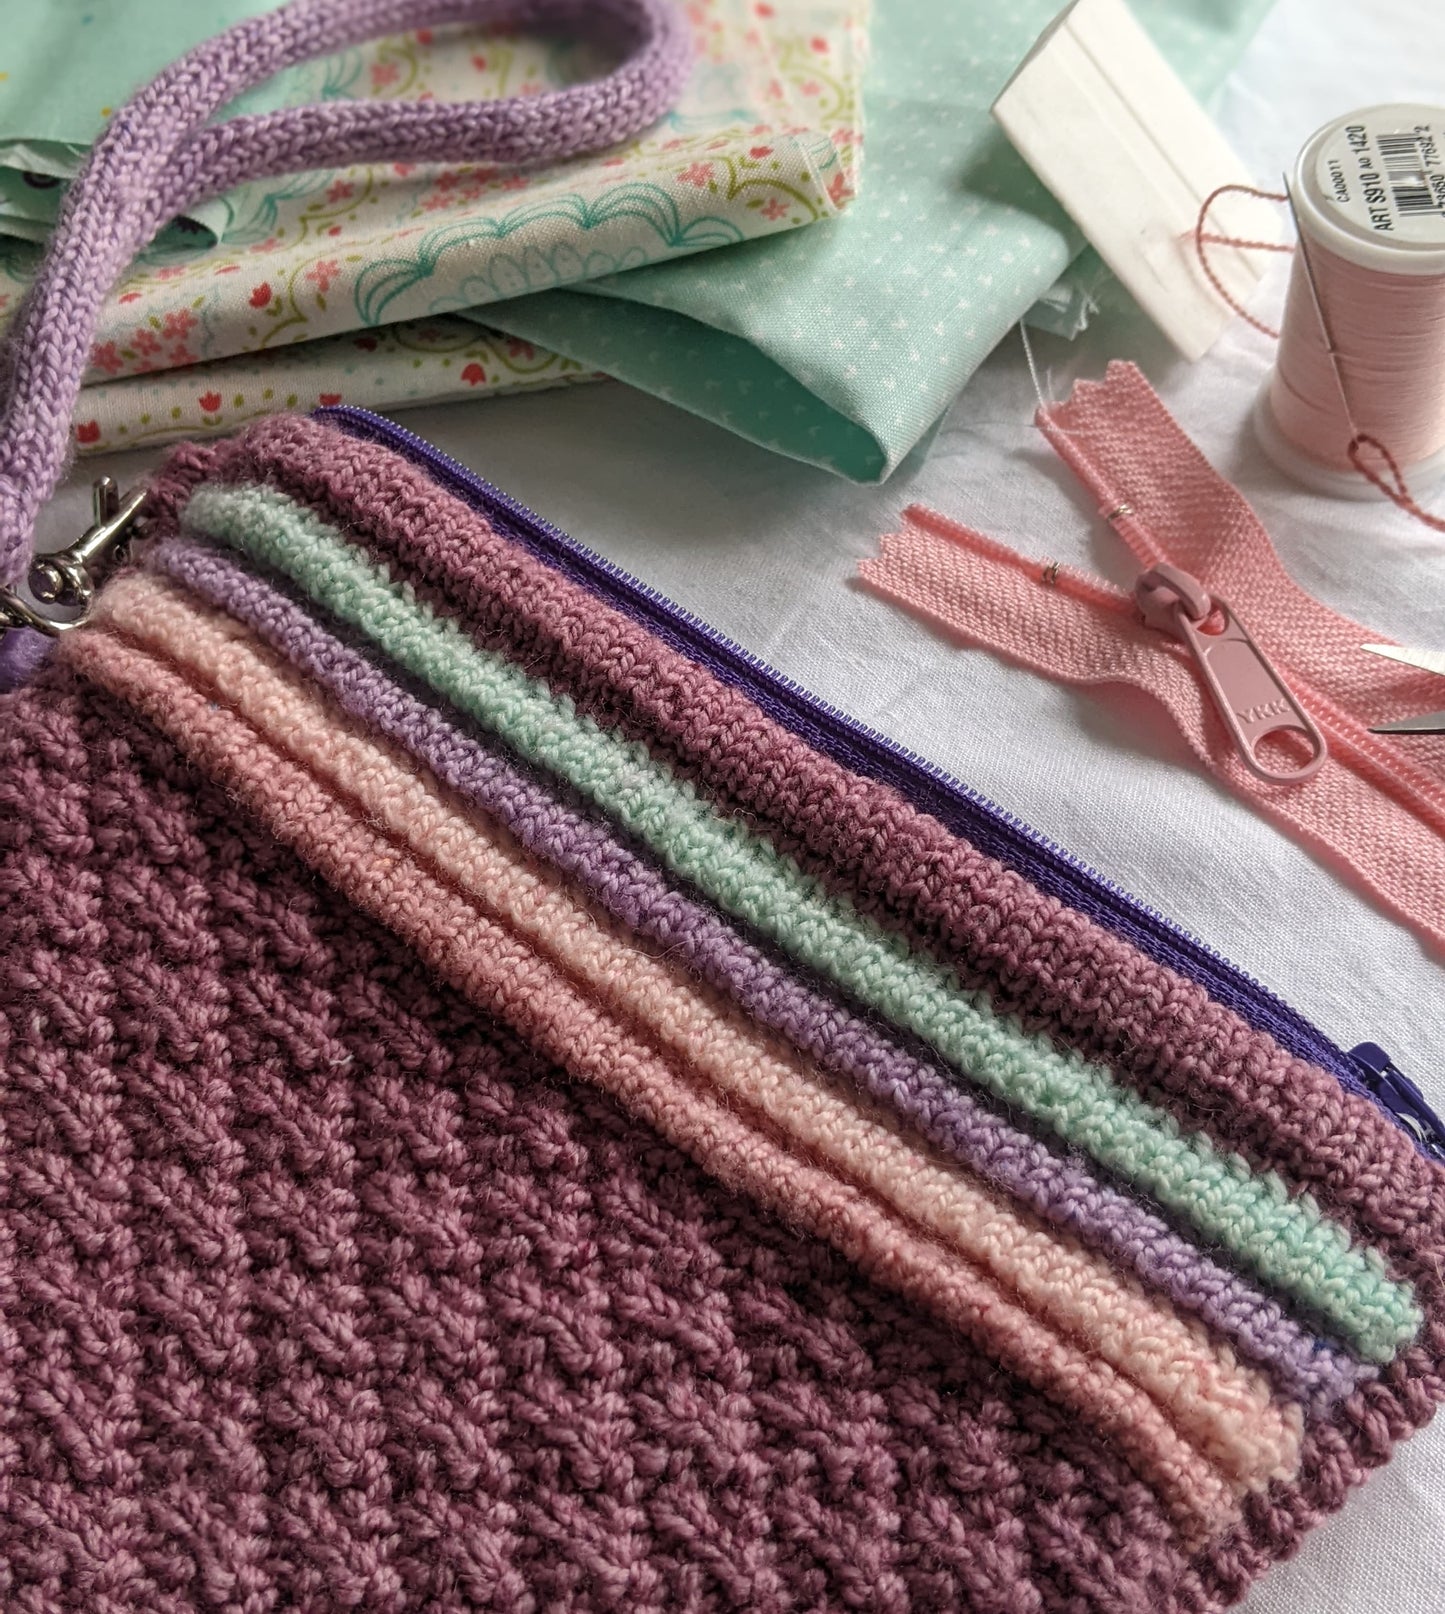 A Ziplet pouch, knit in dark pink, orange, green, and purple yarn lays on a table. Blue fabric, a pink zipper, and a needle and thread can be seen in the background.